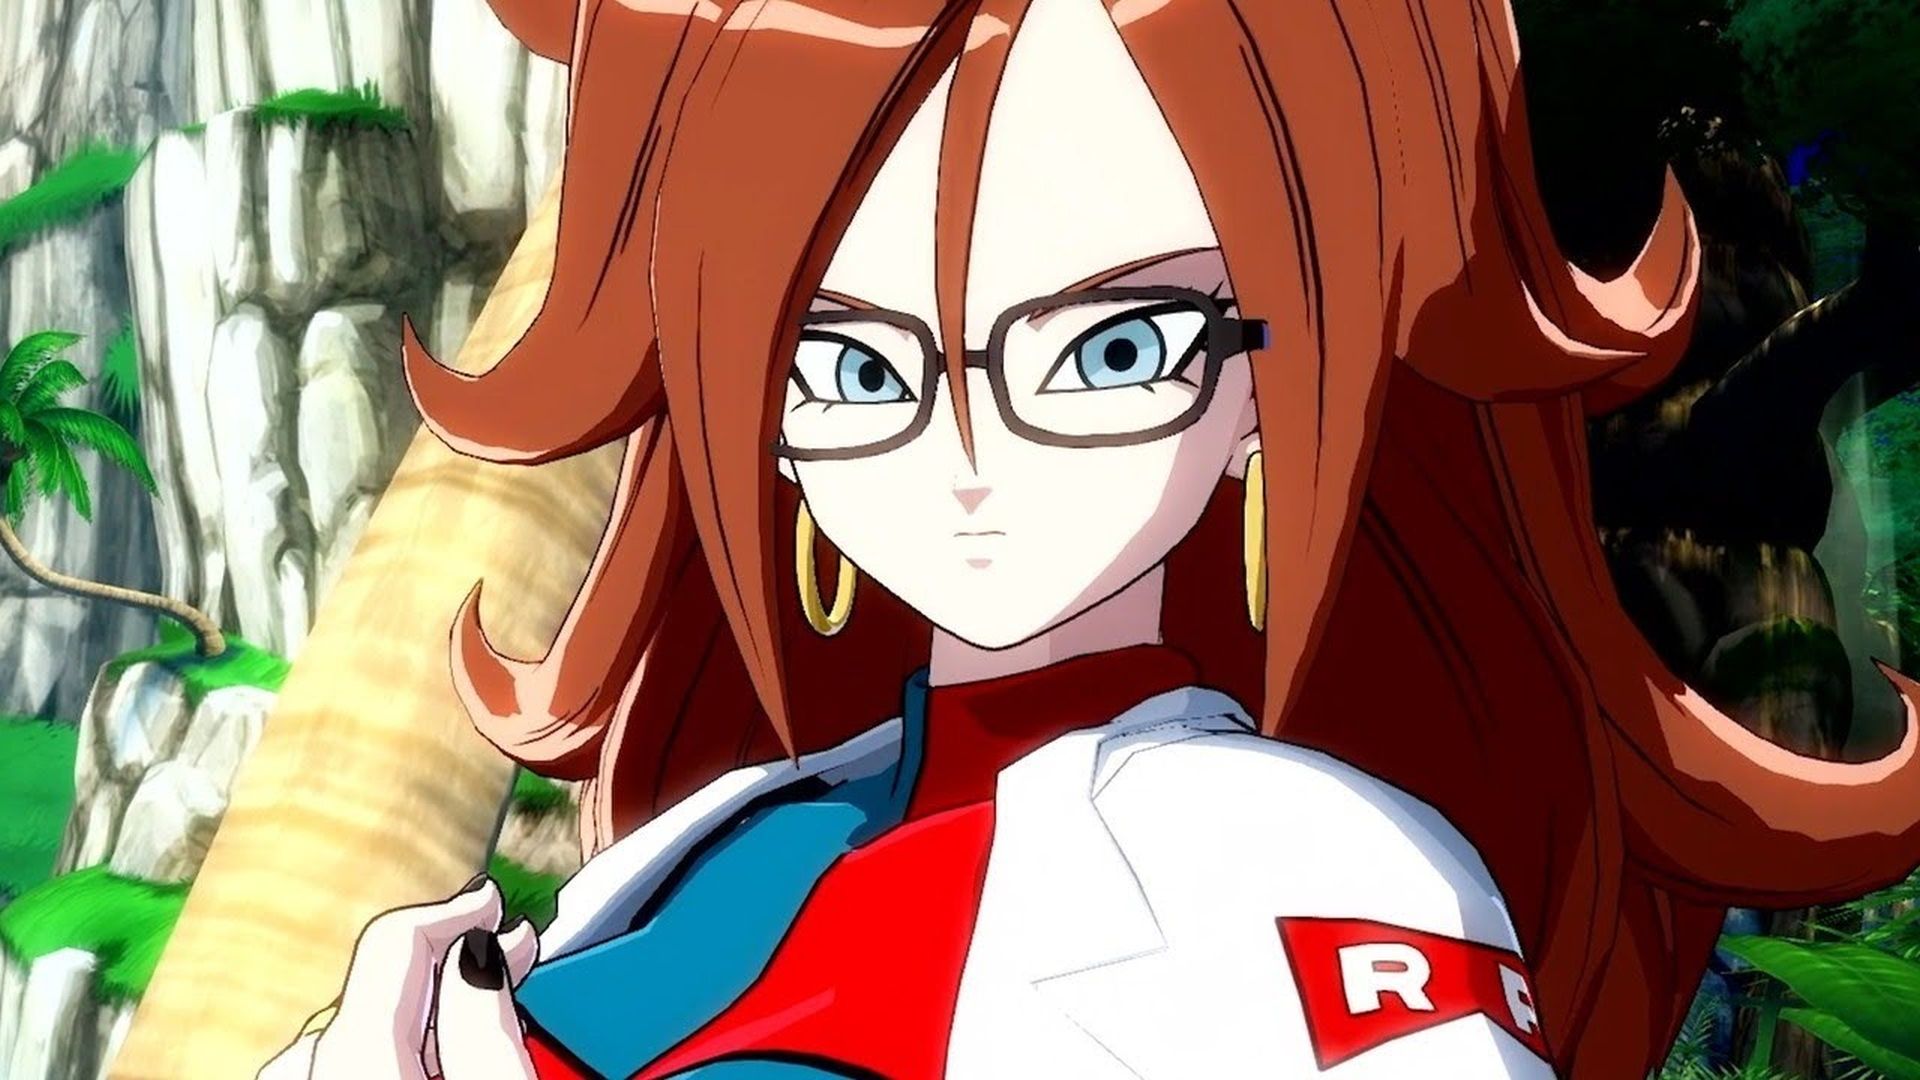 Dragon Ball FighterZ Android 21 (Lab Coat) DLC character announced